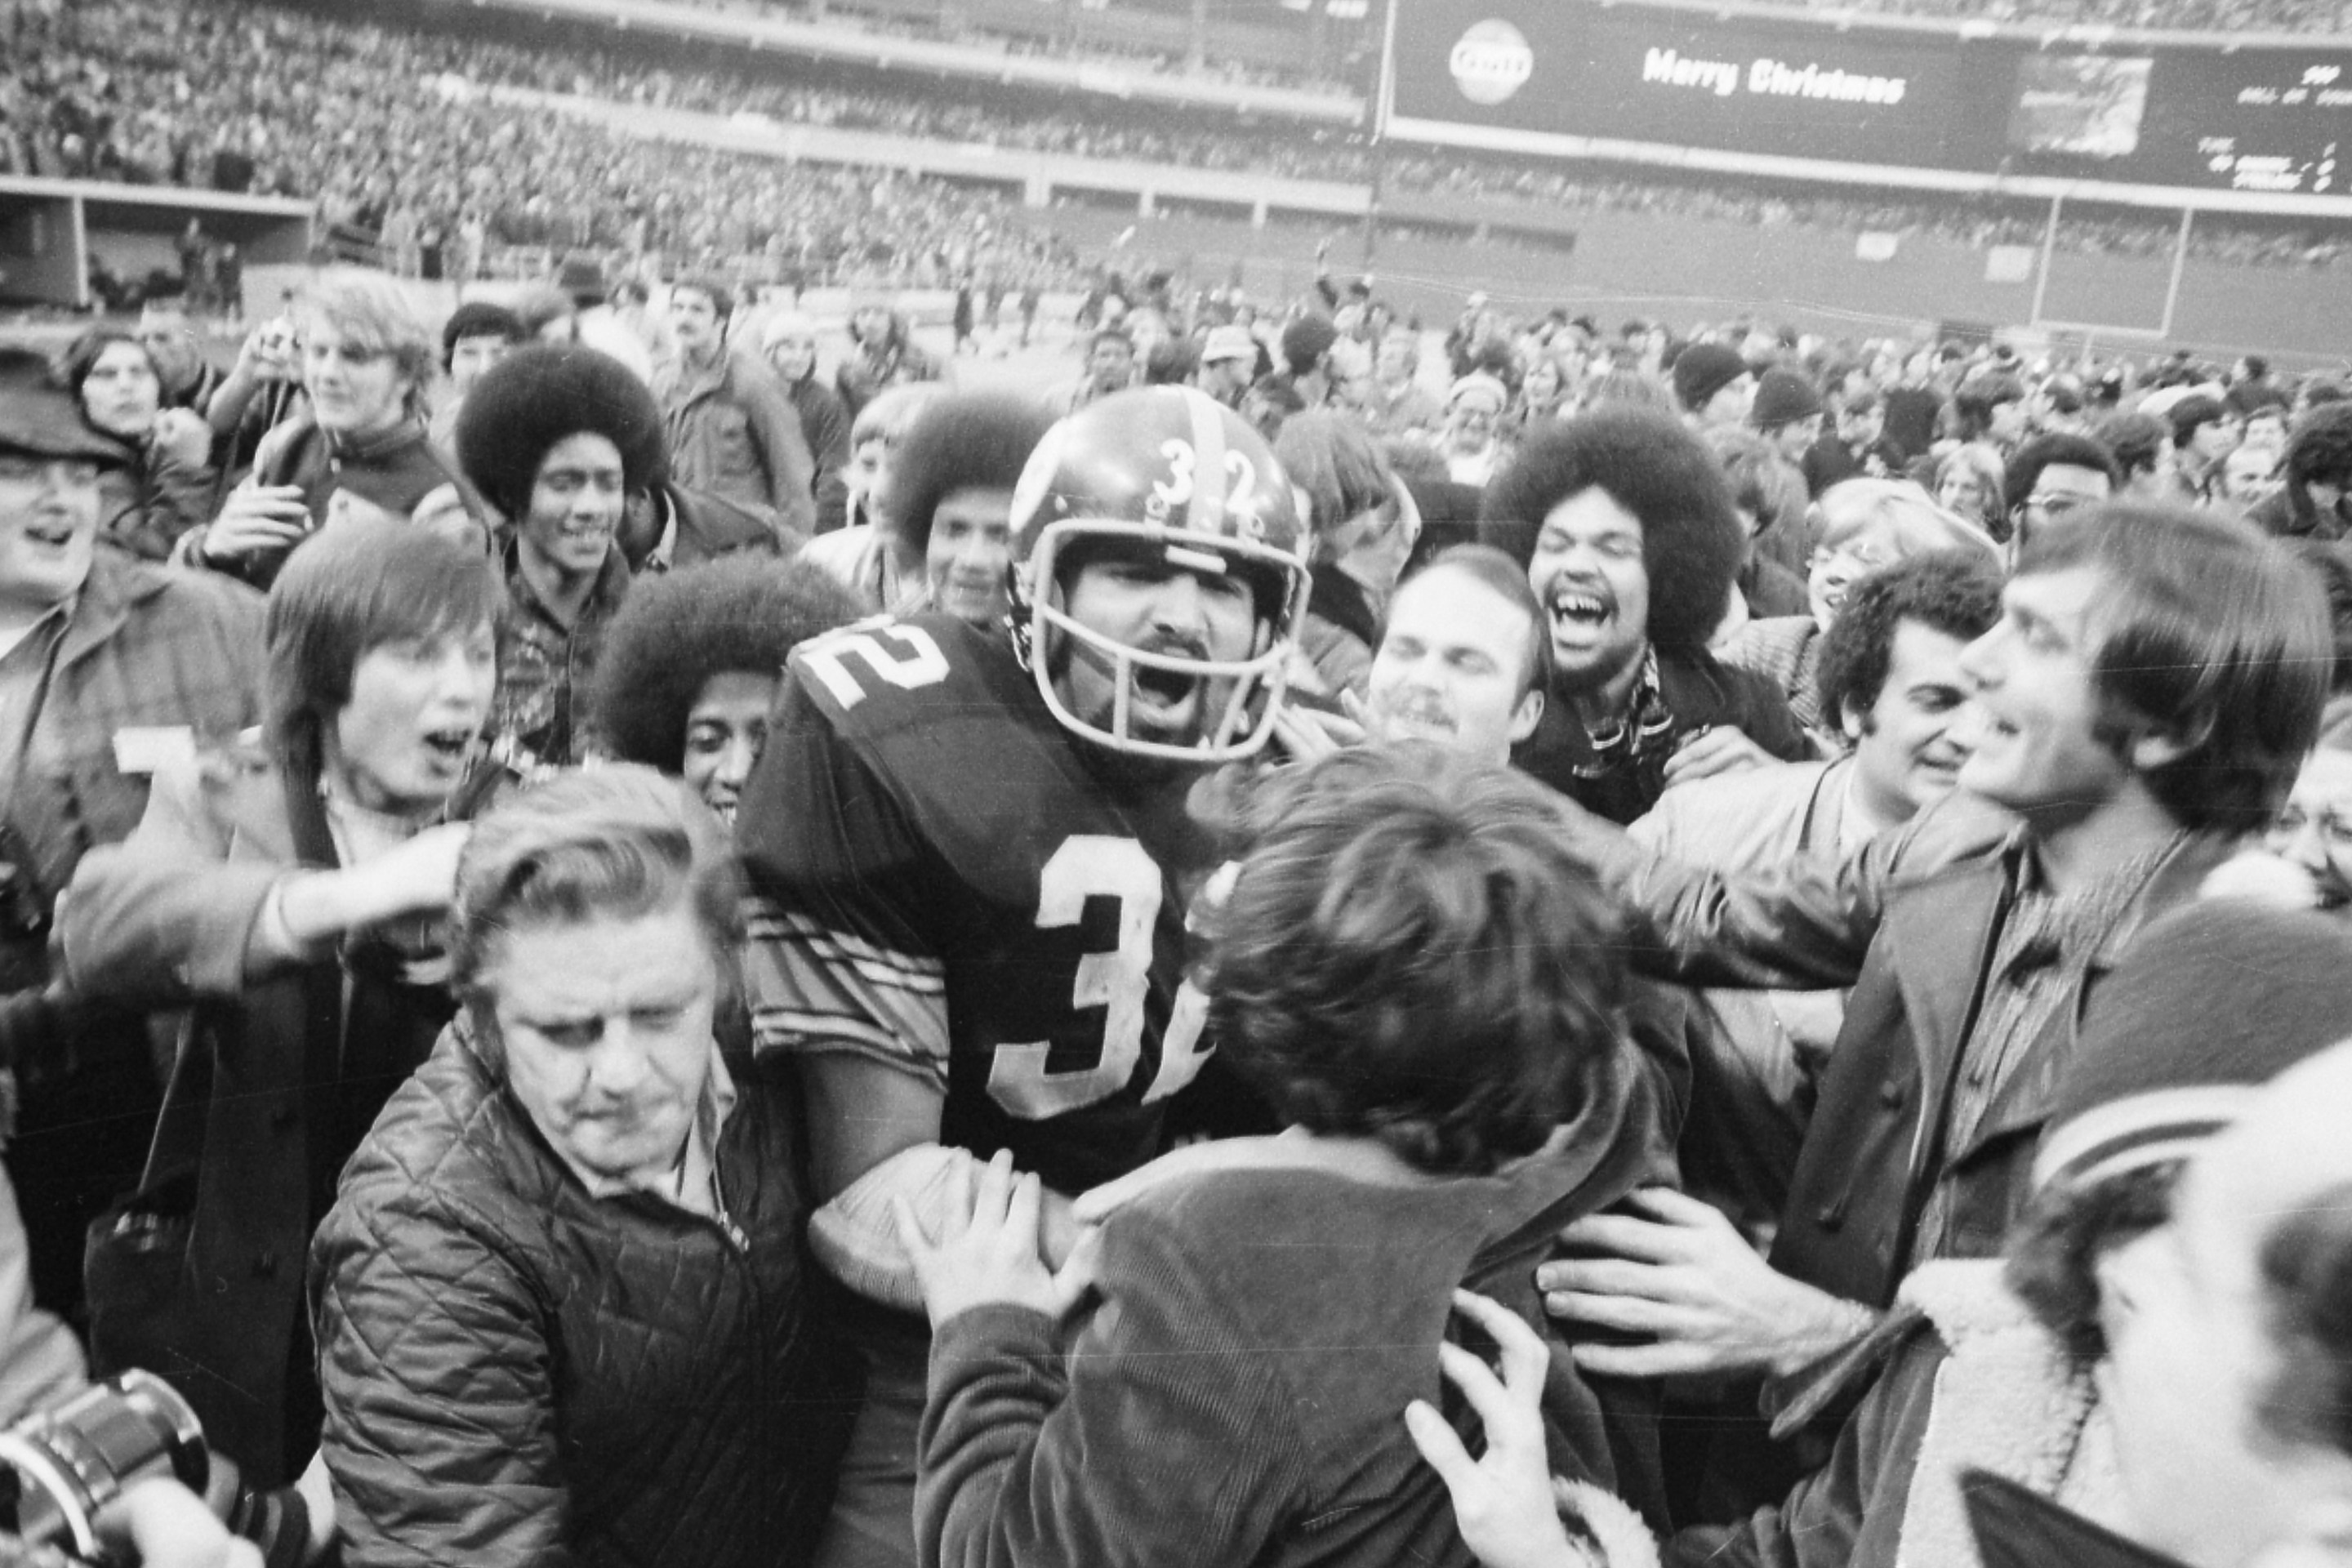 Pittsburgh Steelers' running back Franco Harris is mobed by fans at Three Rivers Stadium after scoring the winning touchdown, nicknamed the "Immaculate Reception," during the American Football Conference (AFC) semi-final game against Oakland. Harris made the touchdown, one of the most famous single plays in the history of professional American football, on a tipped pass from quarterback Terry Bradshaw to Frenchy Fuqua to Harris for the score in the fourth quarter in Pittsburgh.